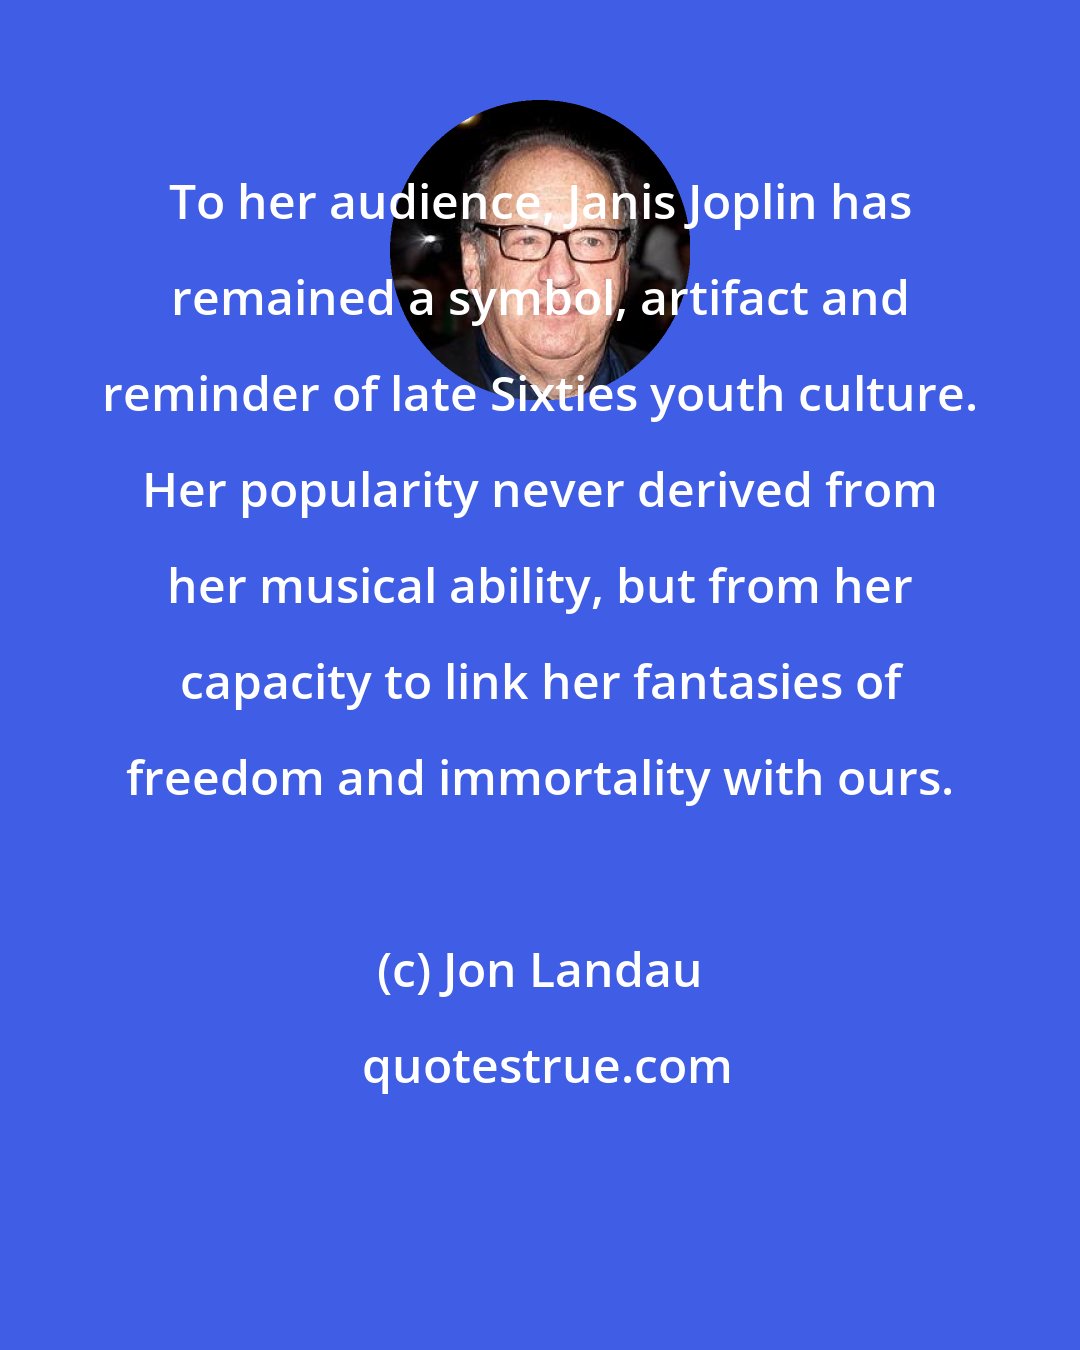 Jon Landau: To her audience, Janis Joplin has remained a symbol, artifact and reminder of late Sixties youth culture. Her popularity never derived from her musical ability, but from her capacity to link her fantasies of freedom and immortality with ours.